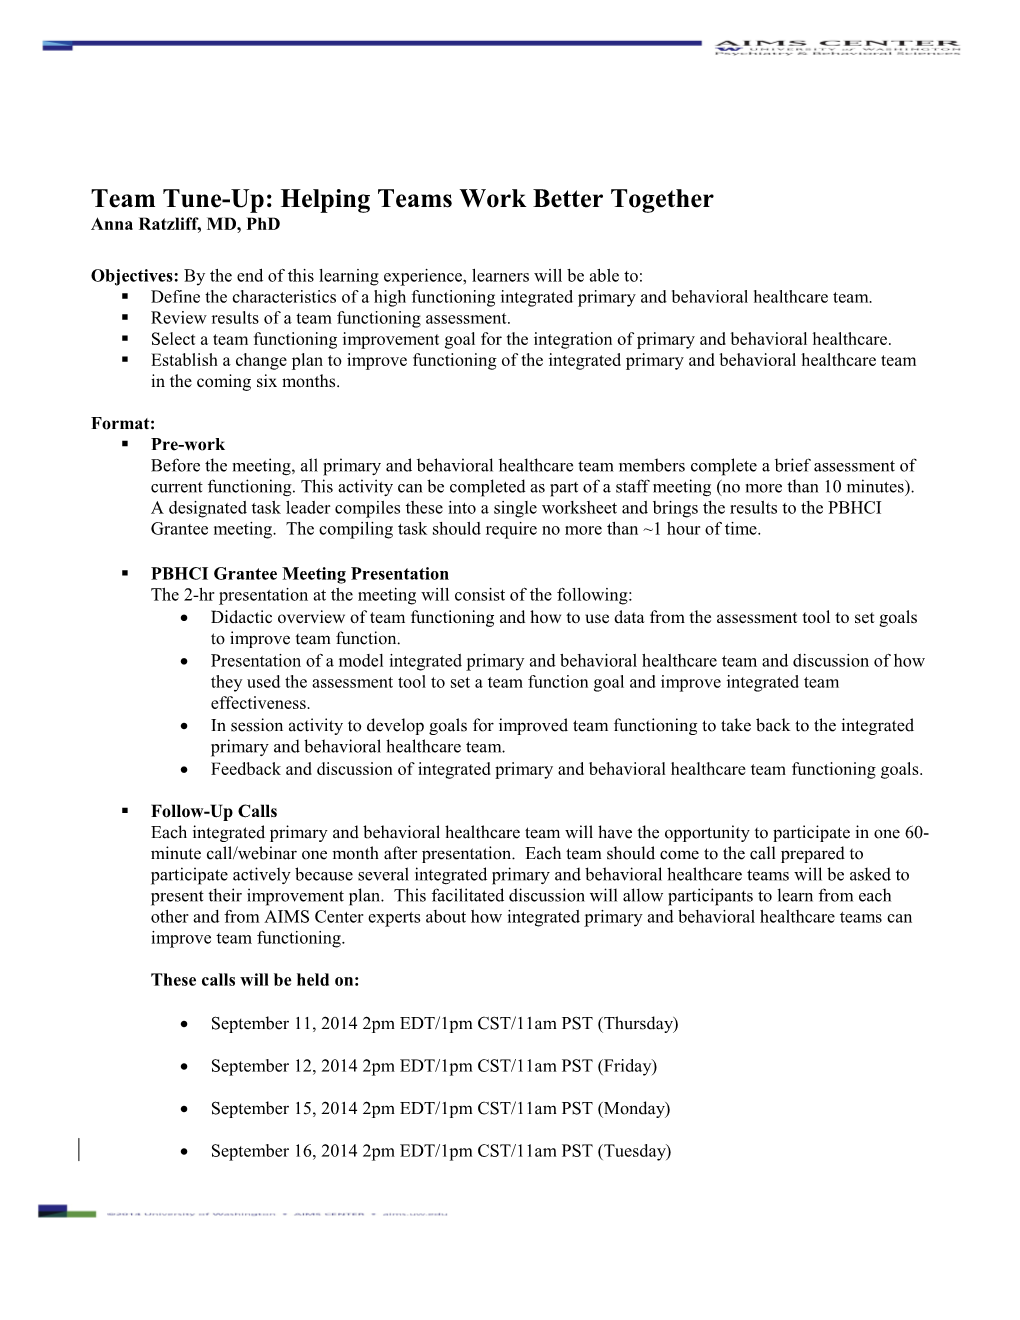 Team Tune-Up: Helping Teams Work Better Together